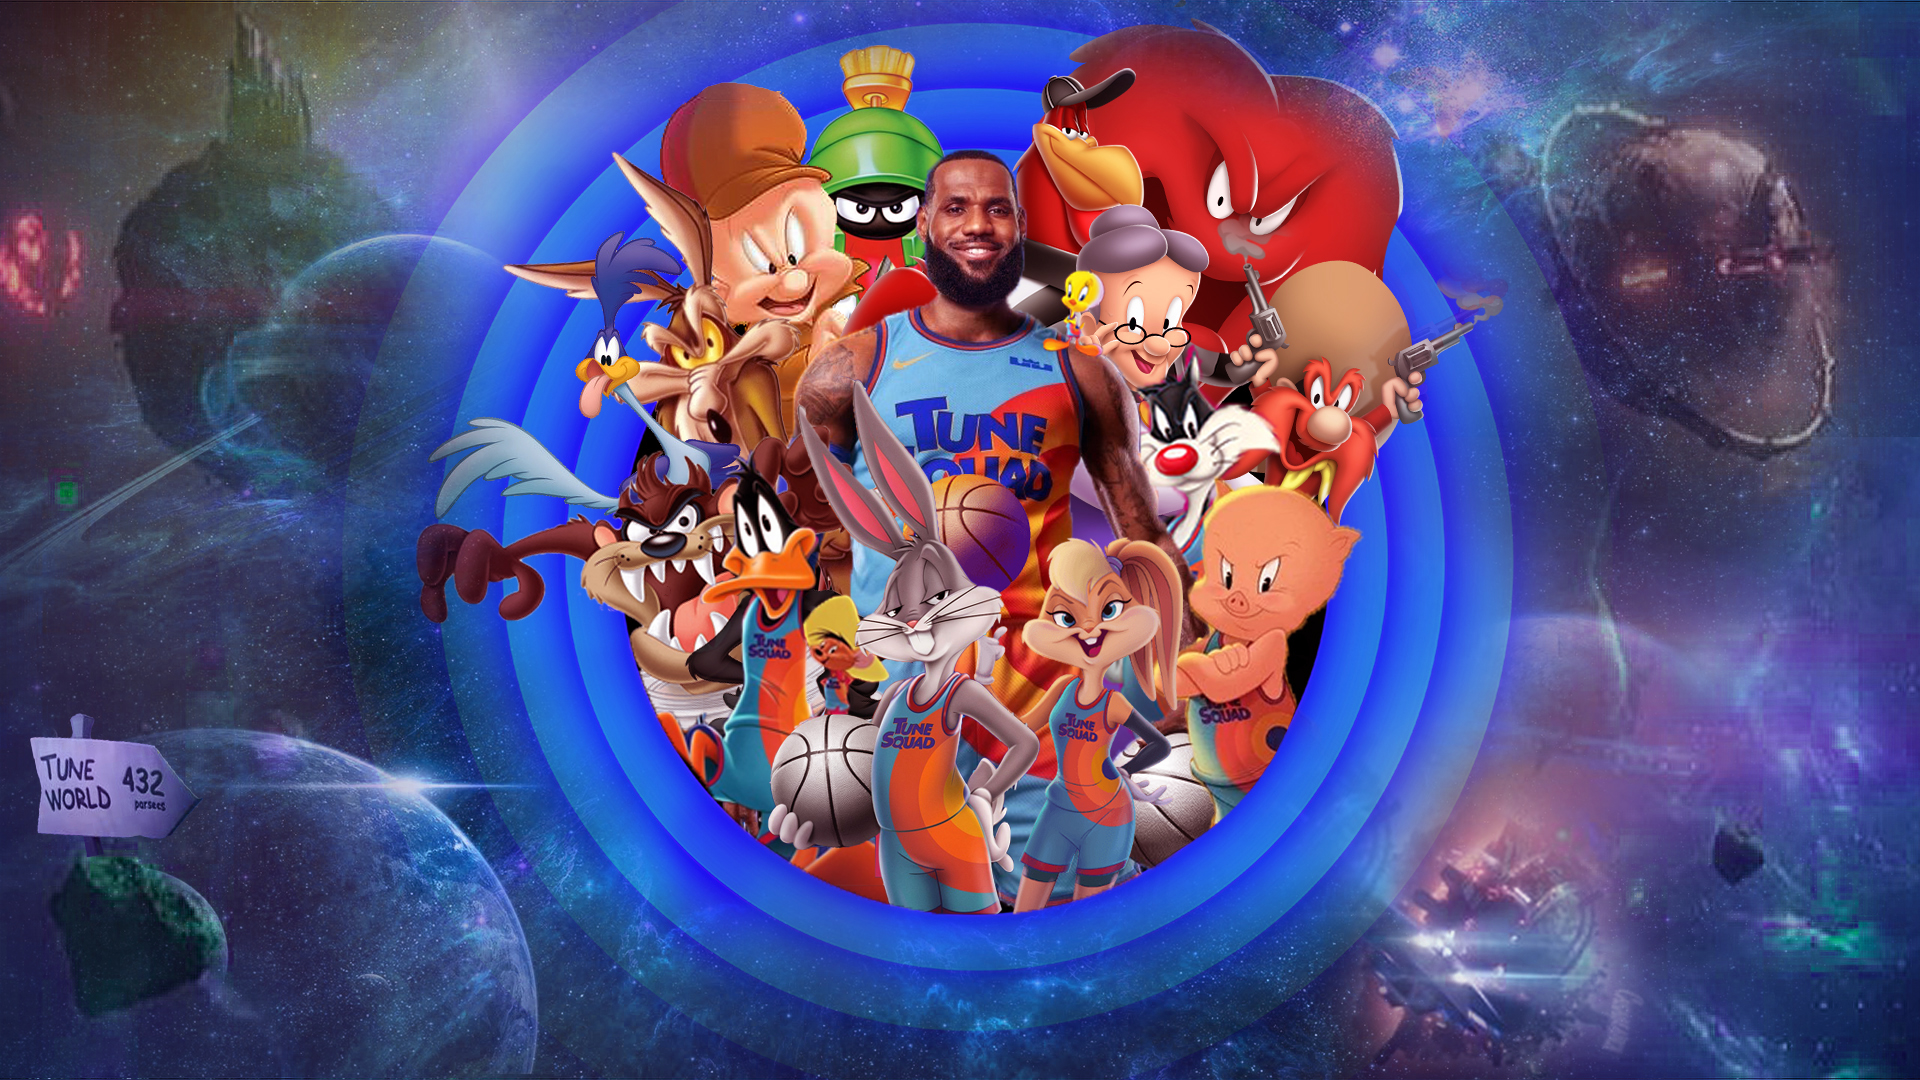 Space Jam: A New Legacy Wallpaper by Thekingblader995 on DeviantArt